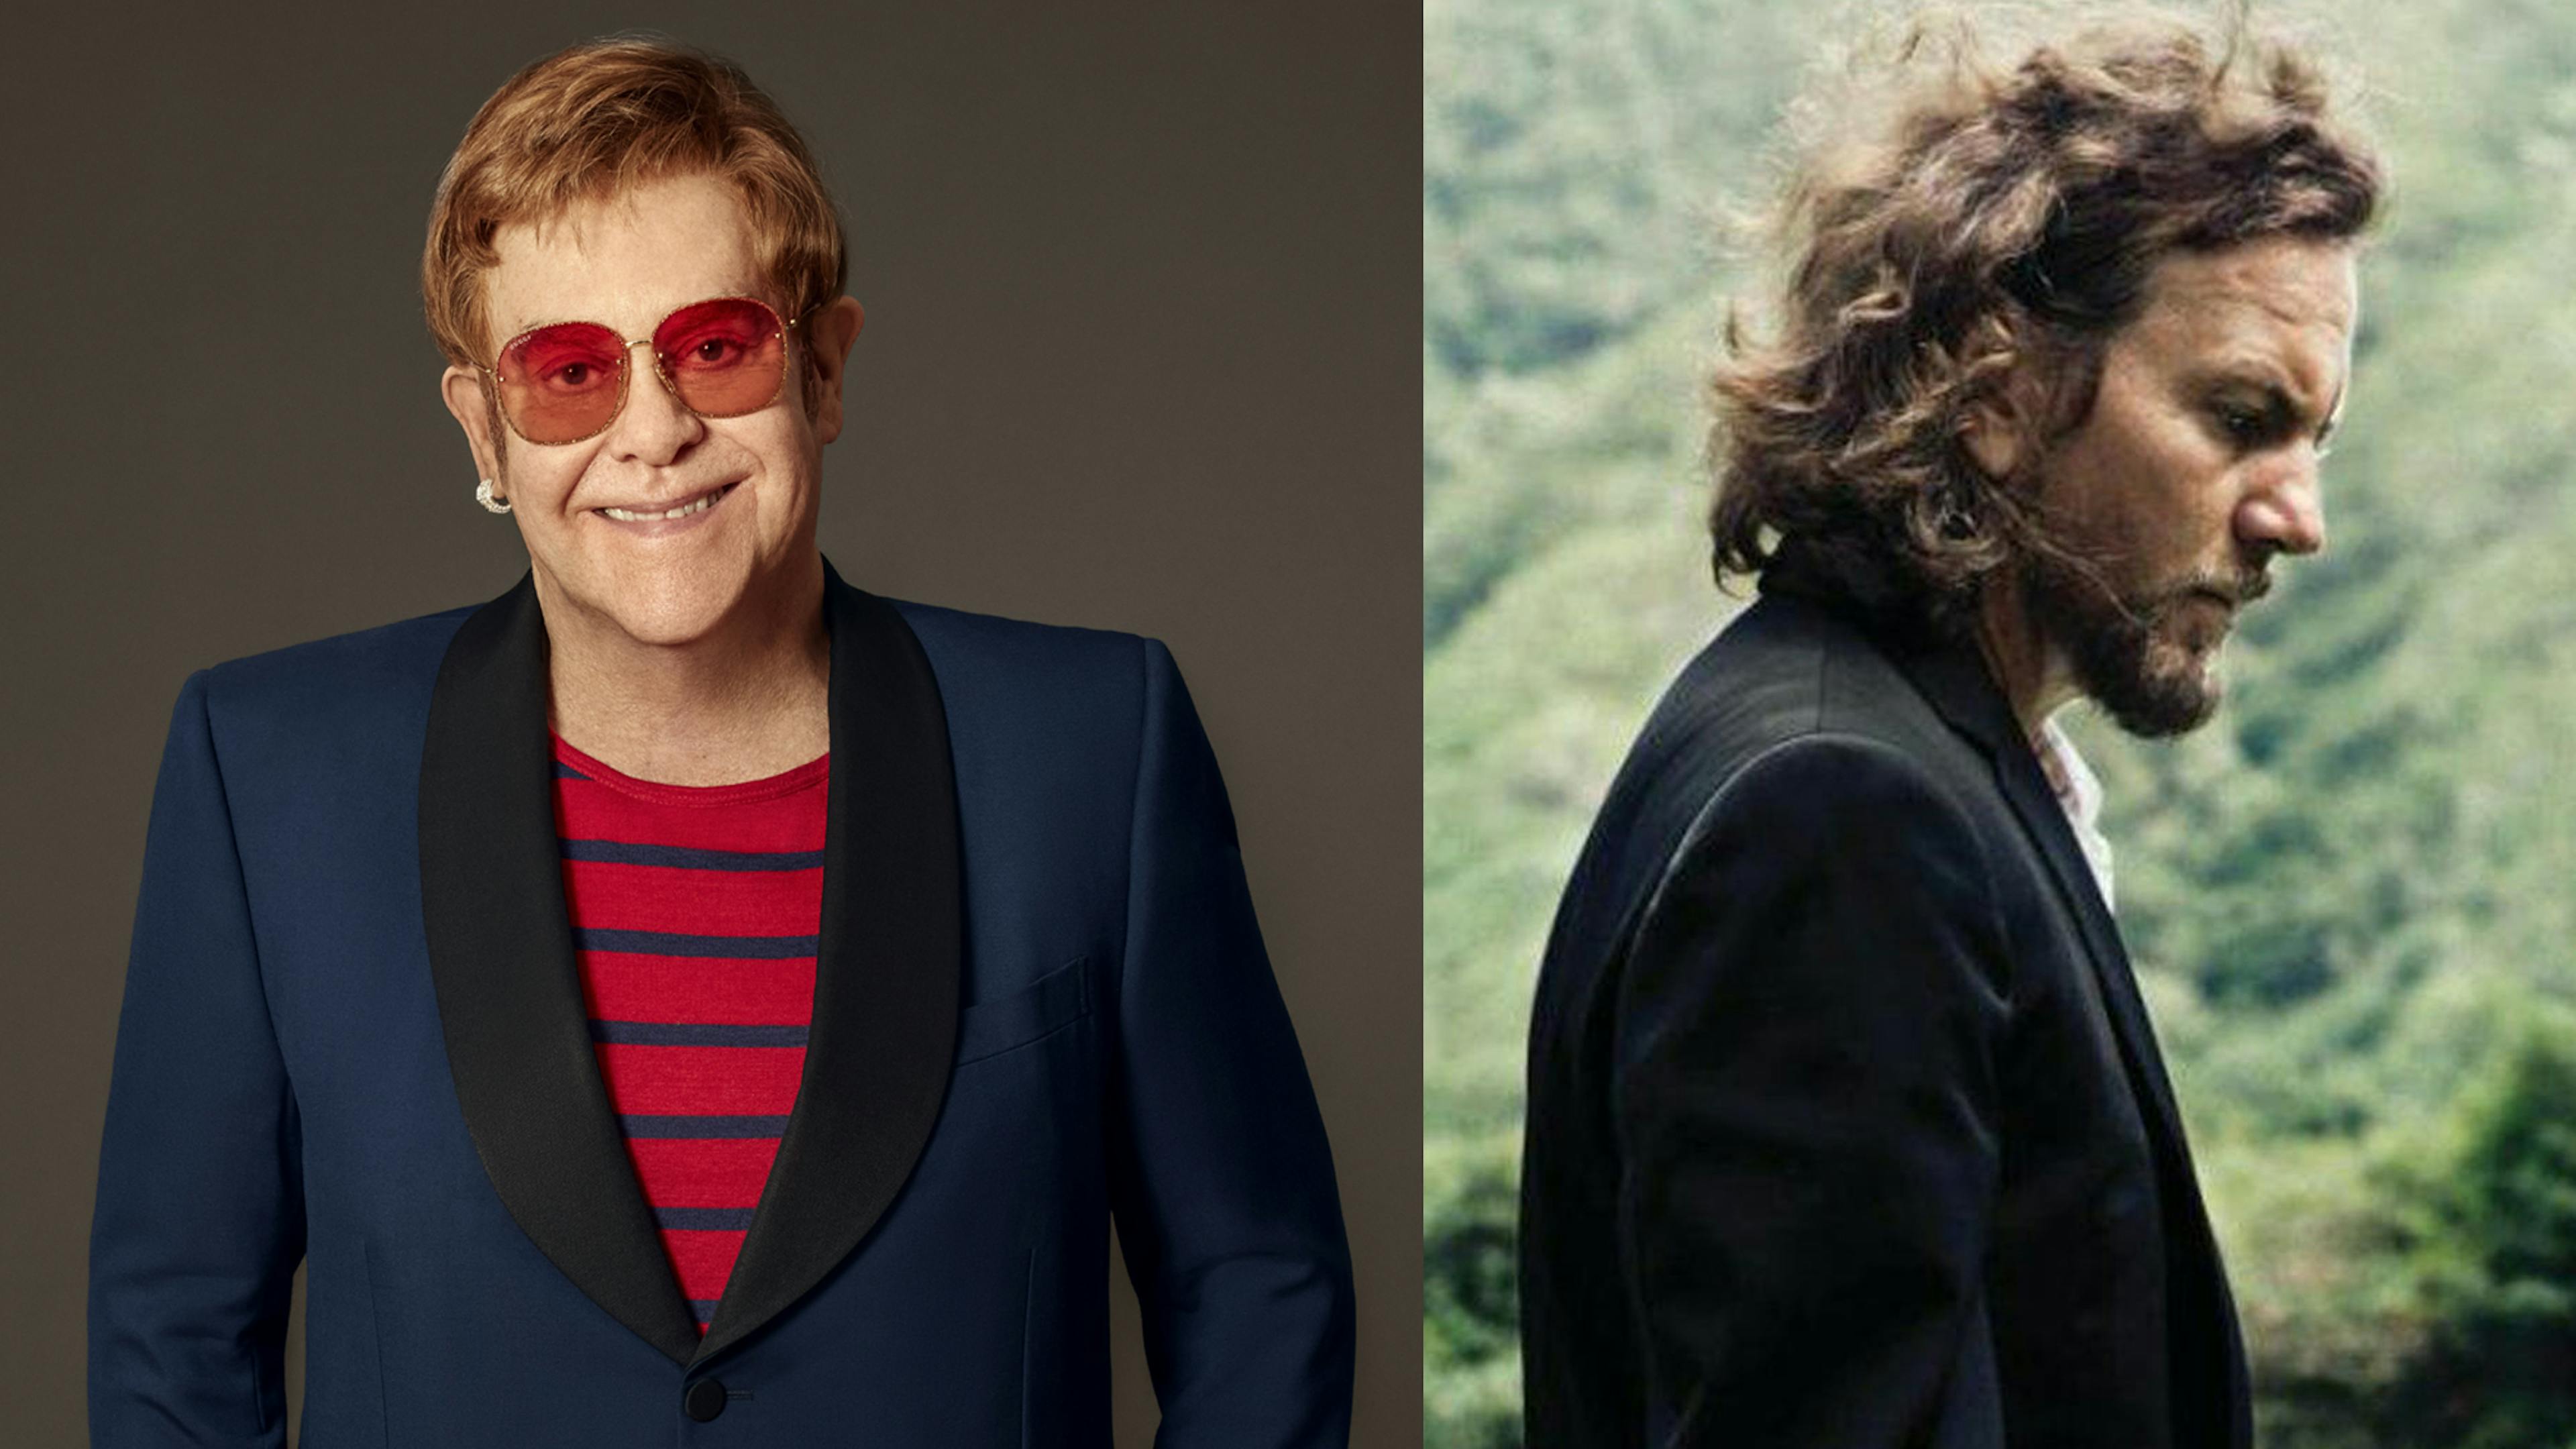 Elton John announces new album featuring collabs with Pearl Jam's Eddie Vedder and more